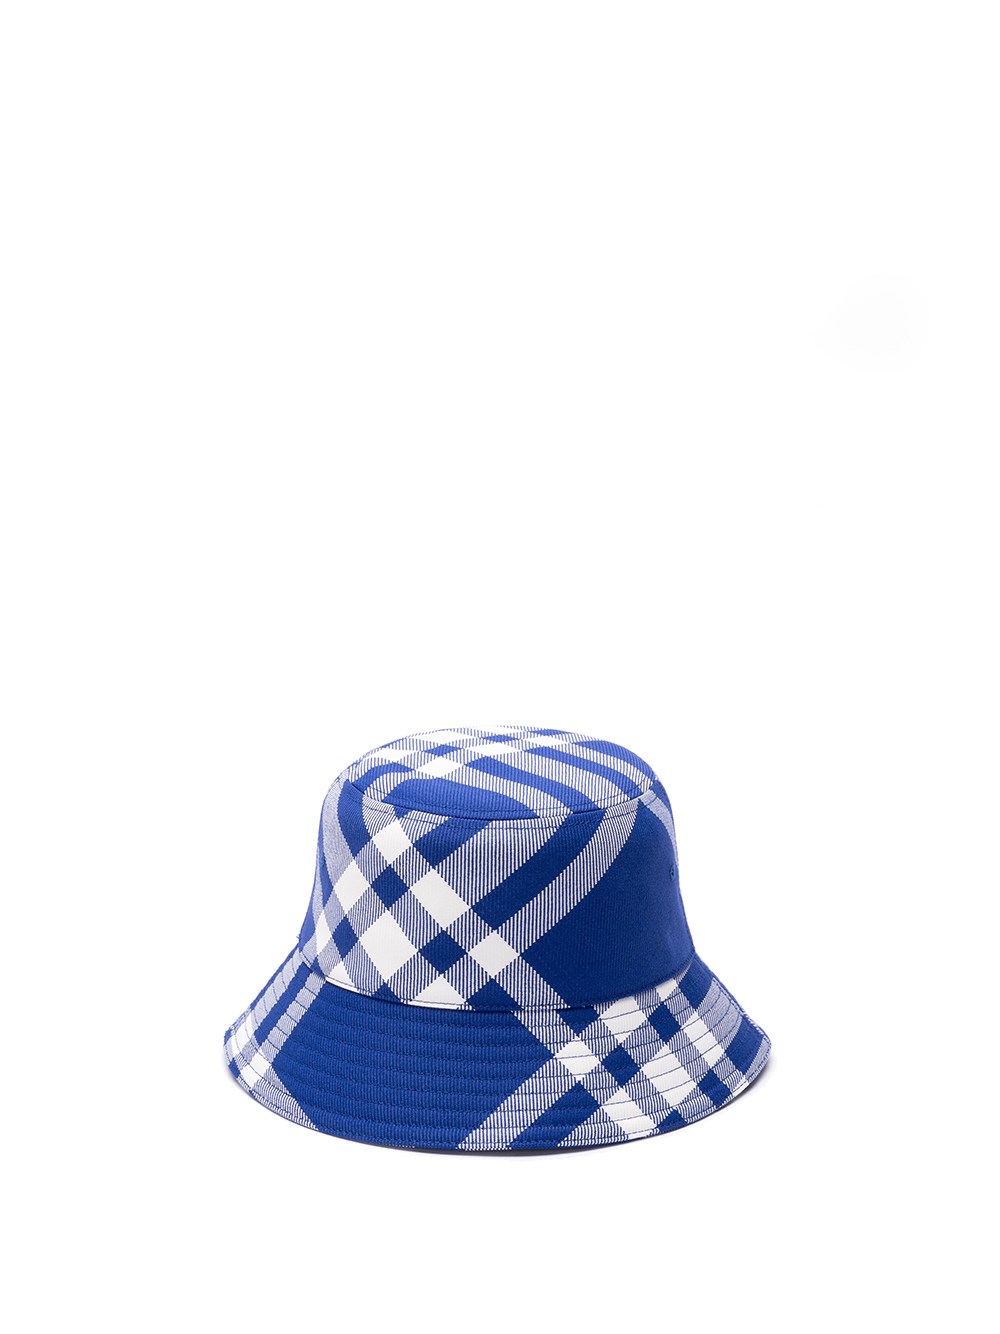 Burberry Check Motif Bucket Hat In Blue